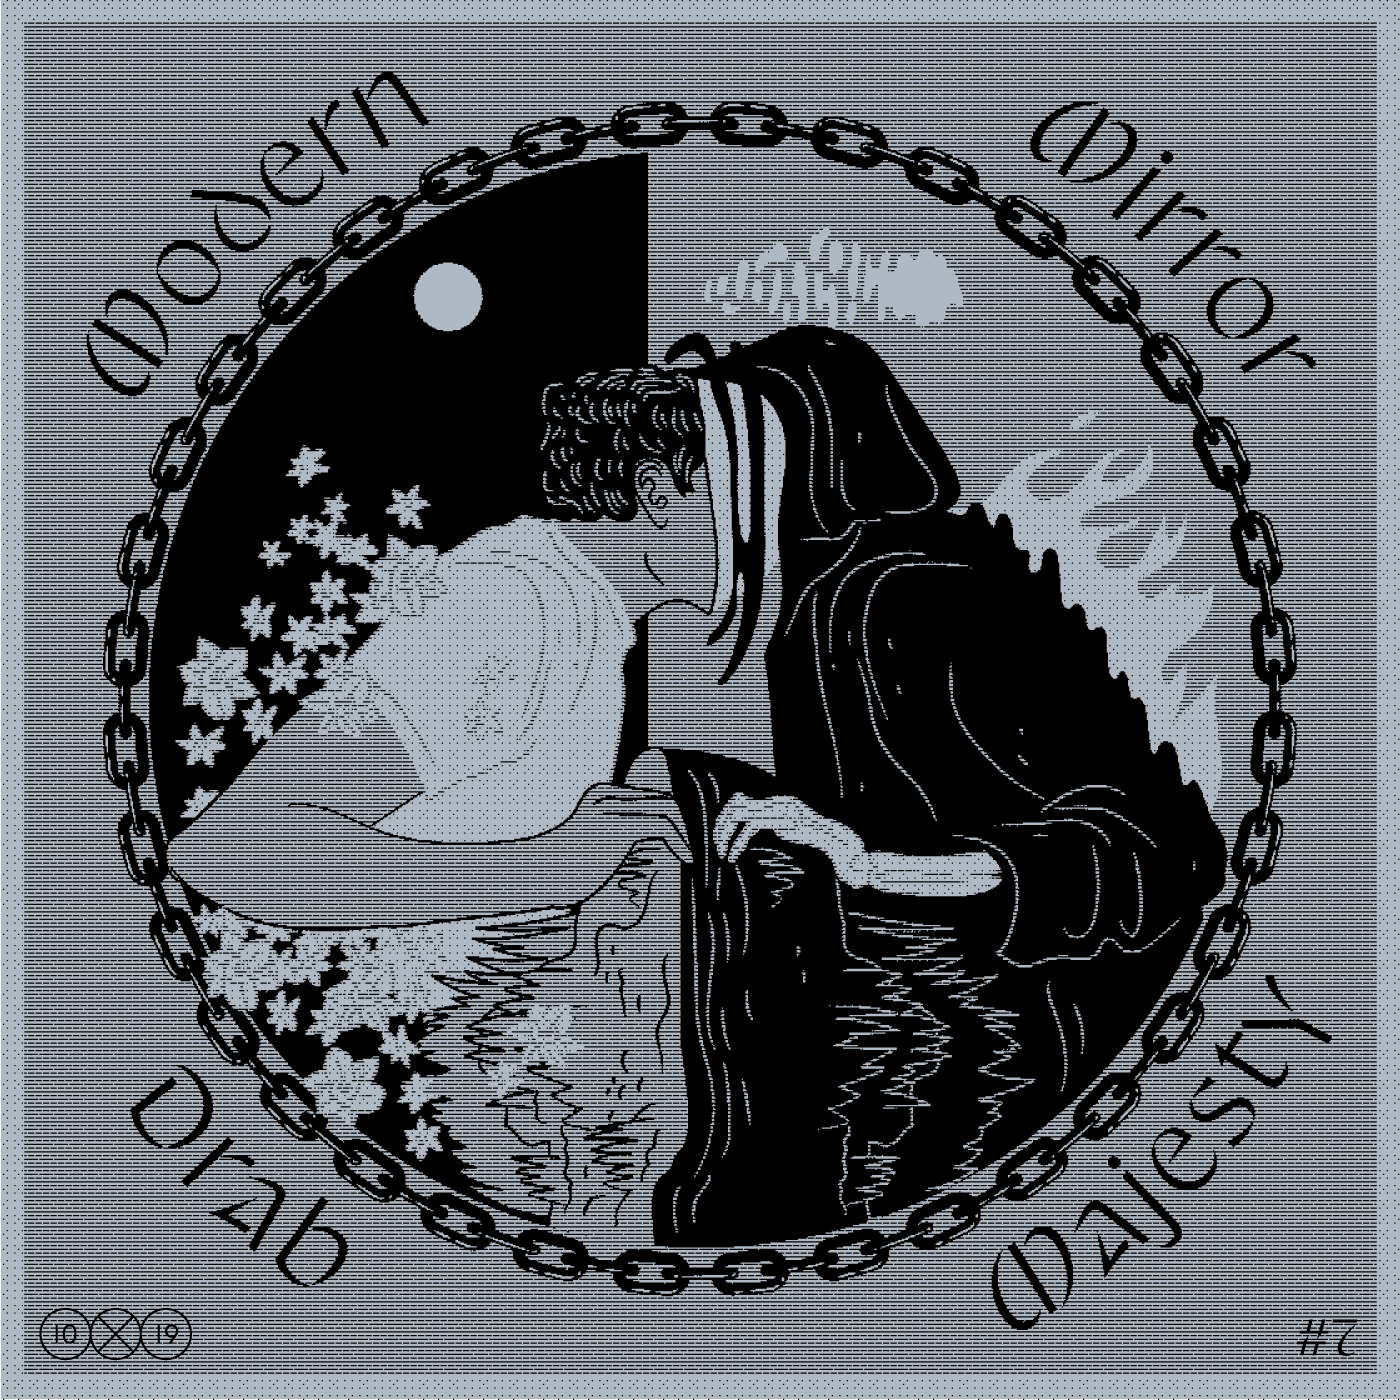 Drab Majesty album cover by Jen Hood for 10x19